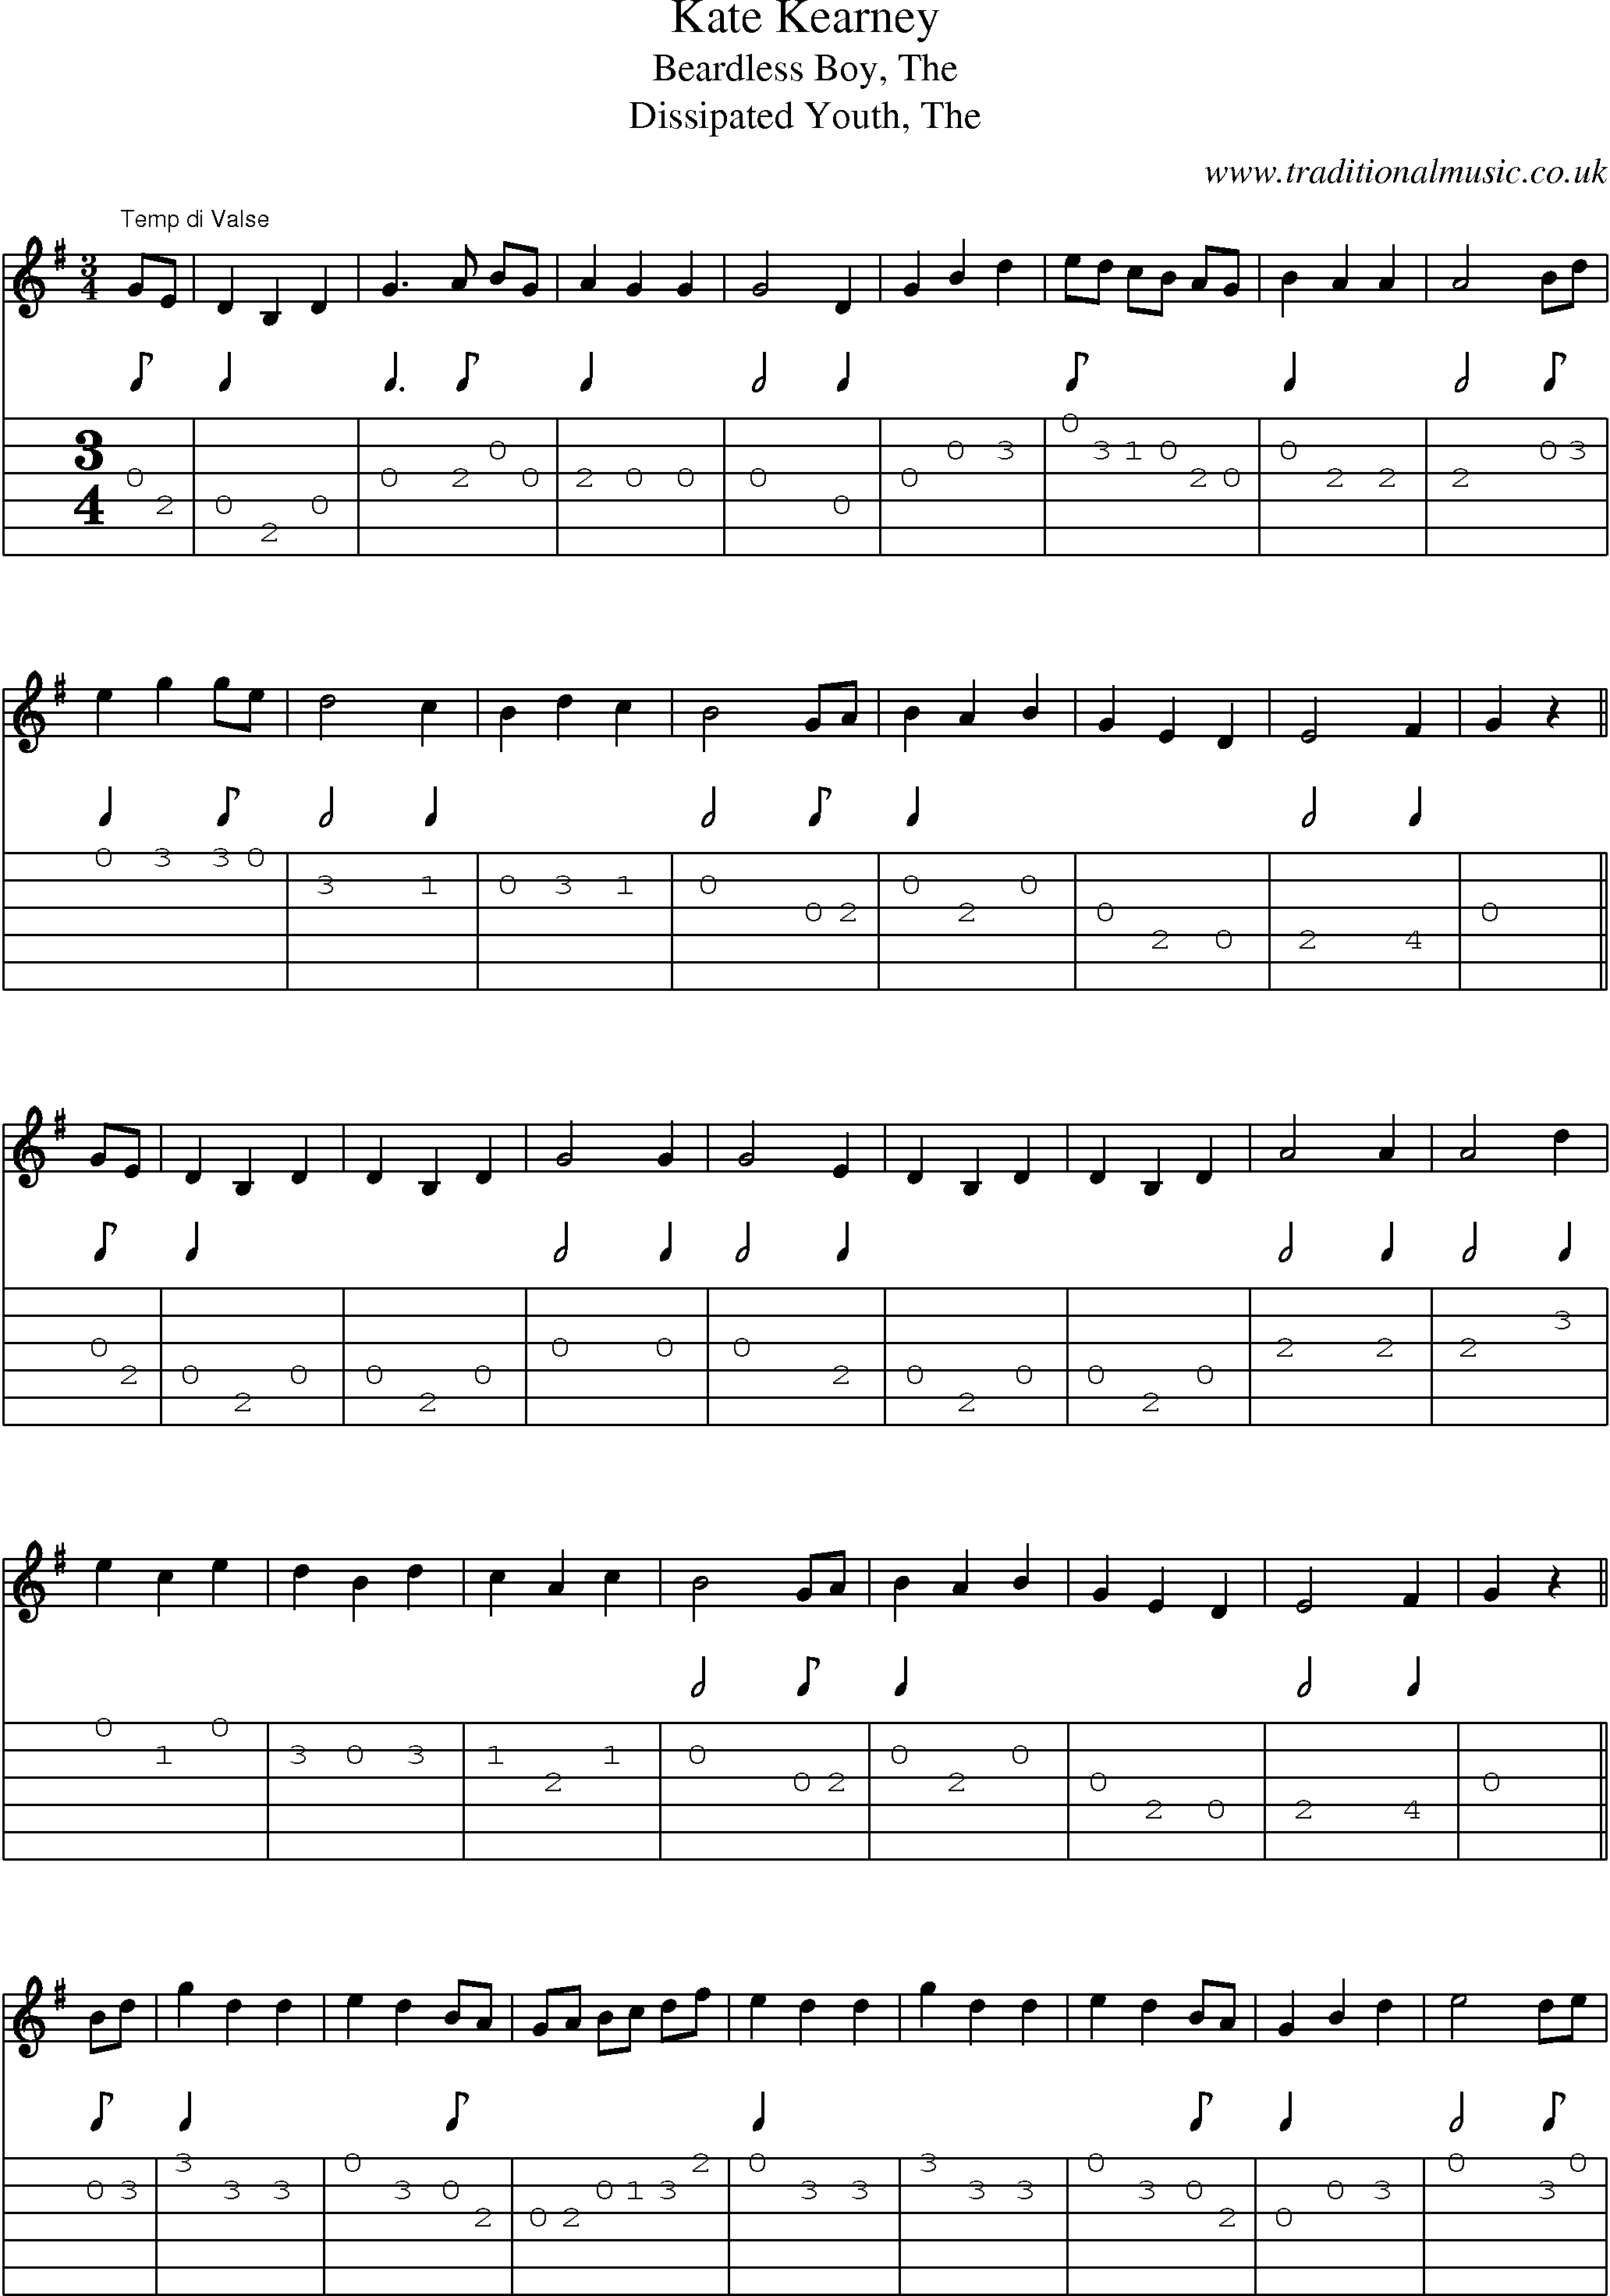 Music Score and Guitar Tabs for Kate Kearney